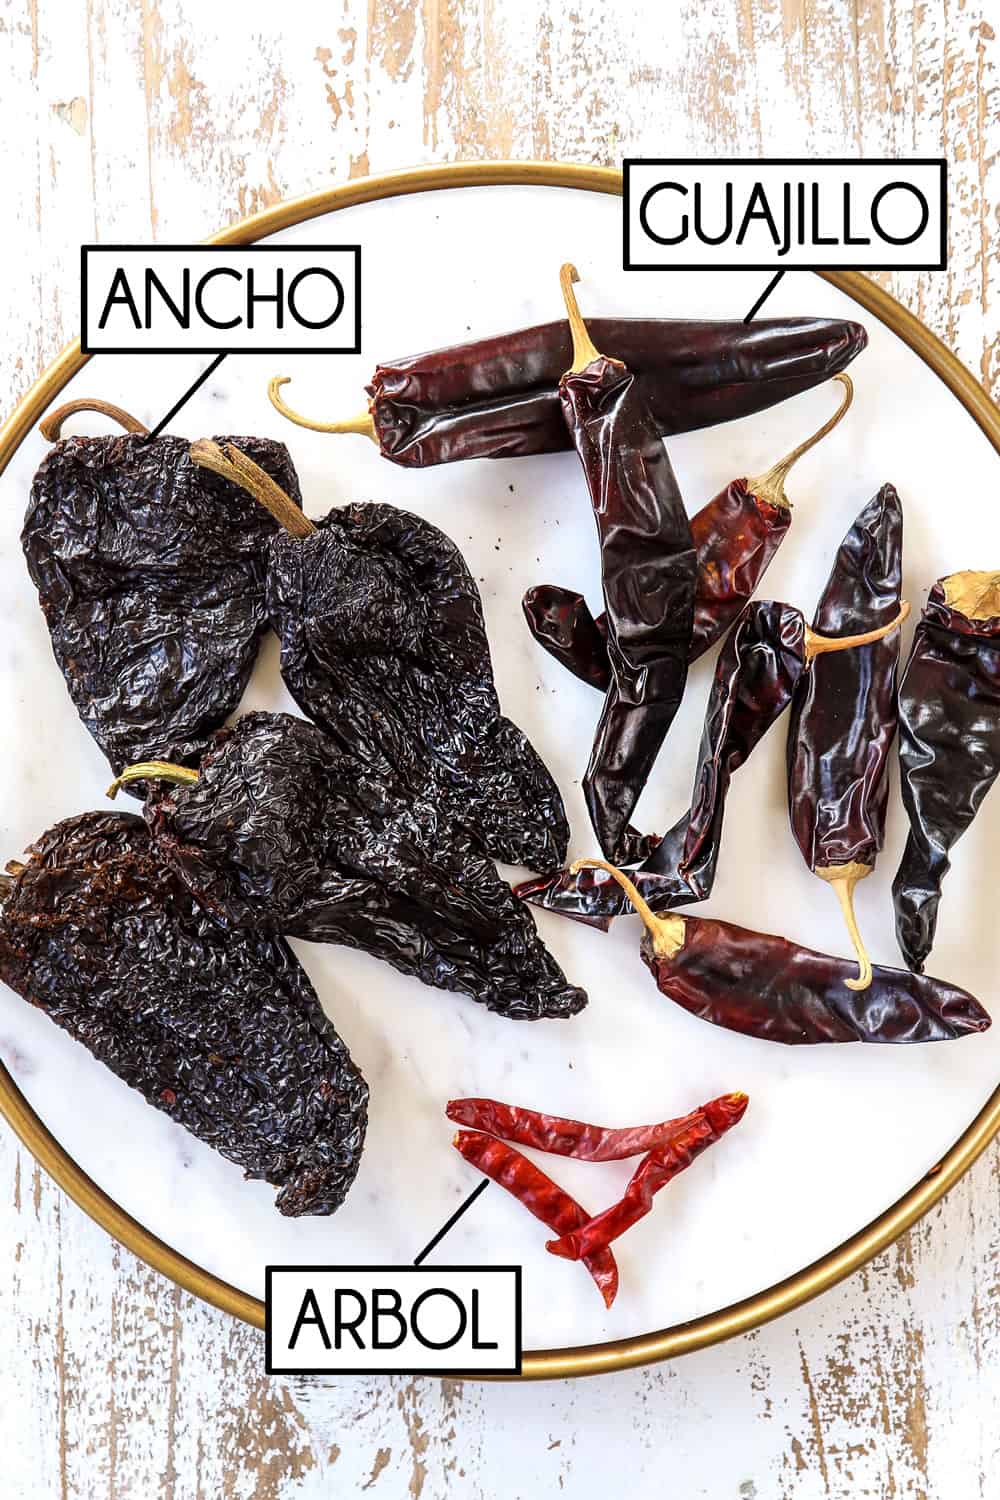 showing how to make adobo sauce by showing what guajillo chilies, ancho chilies and arbol chilies look like